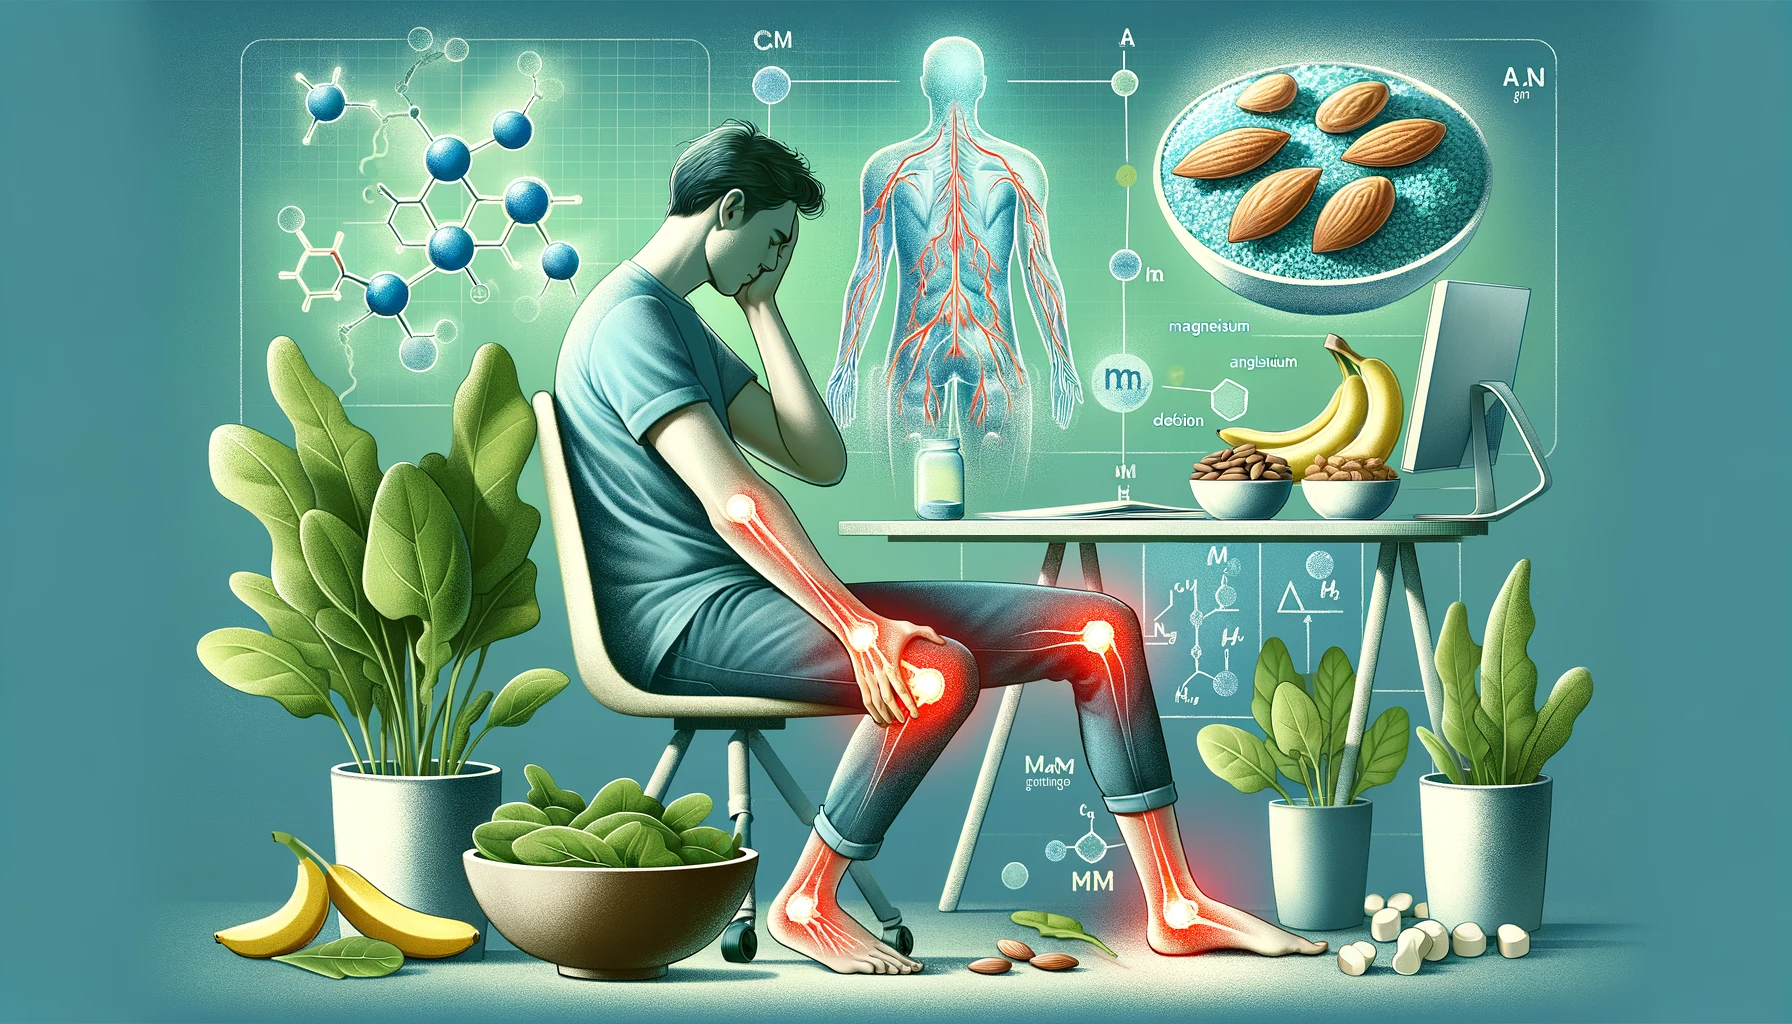 Infographic illustrating the benefits of magnesium and symptoms of deficiency in a sedentary lifestyle with a person experiencing leg cramps at a desk, surrounded by magnesium-rich foods, and molecular structures of magnesium, calcium, and potassium.